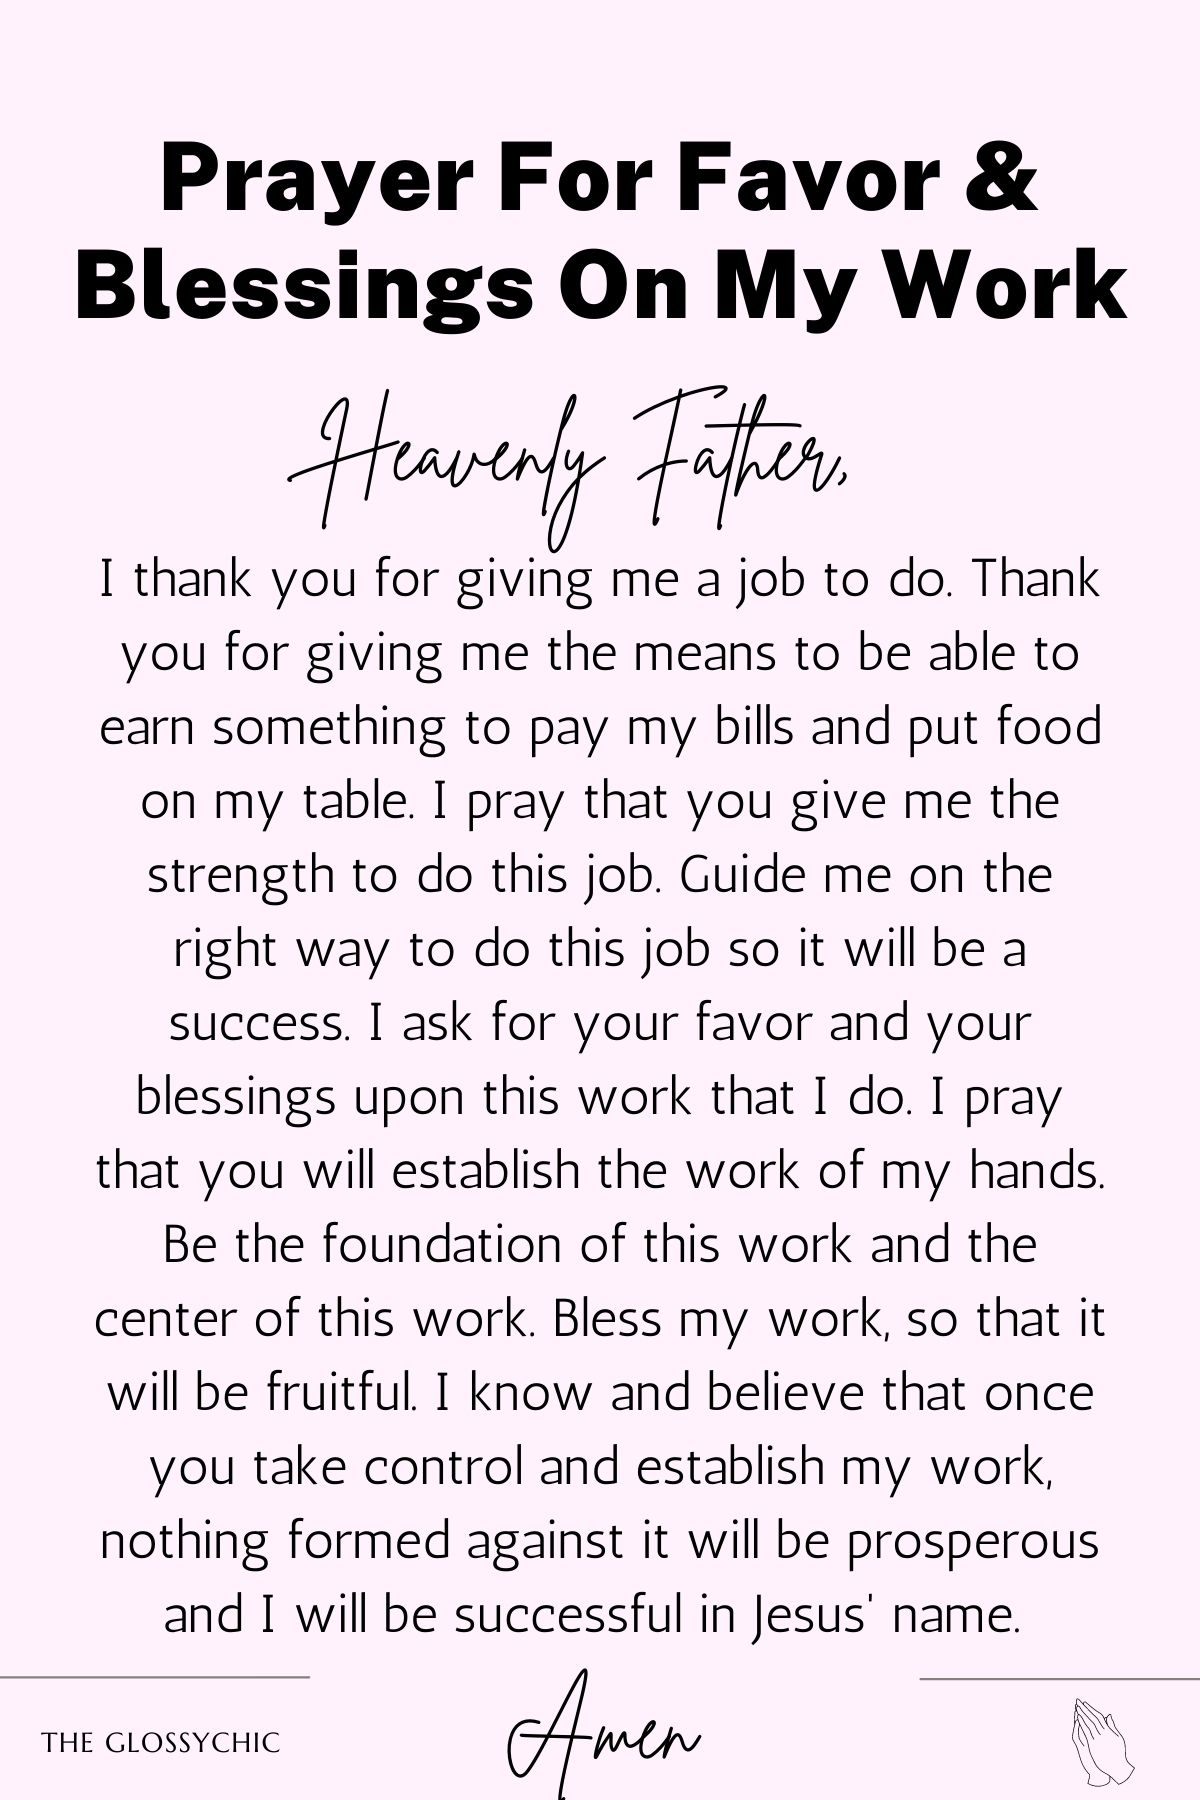 Prayer for favor and blessings on my work